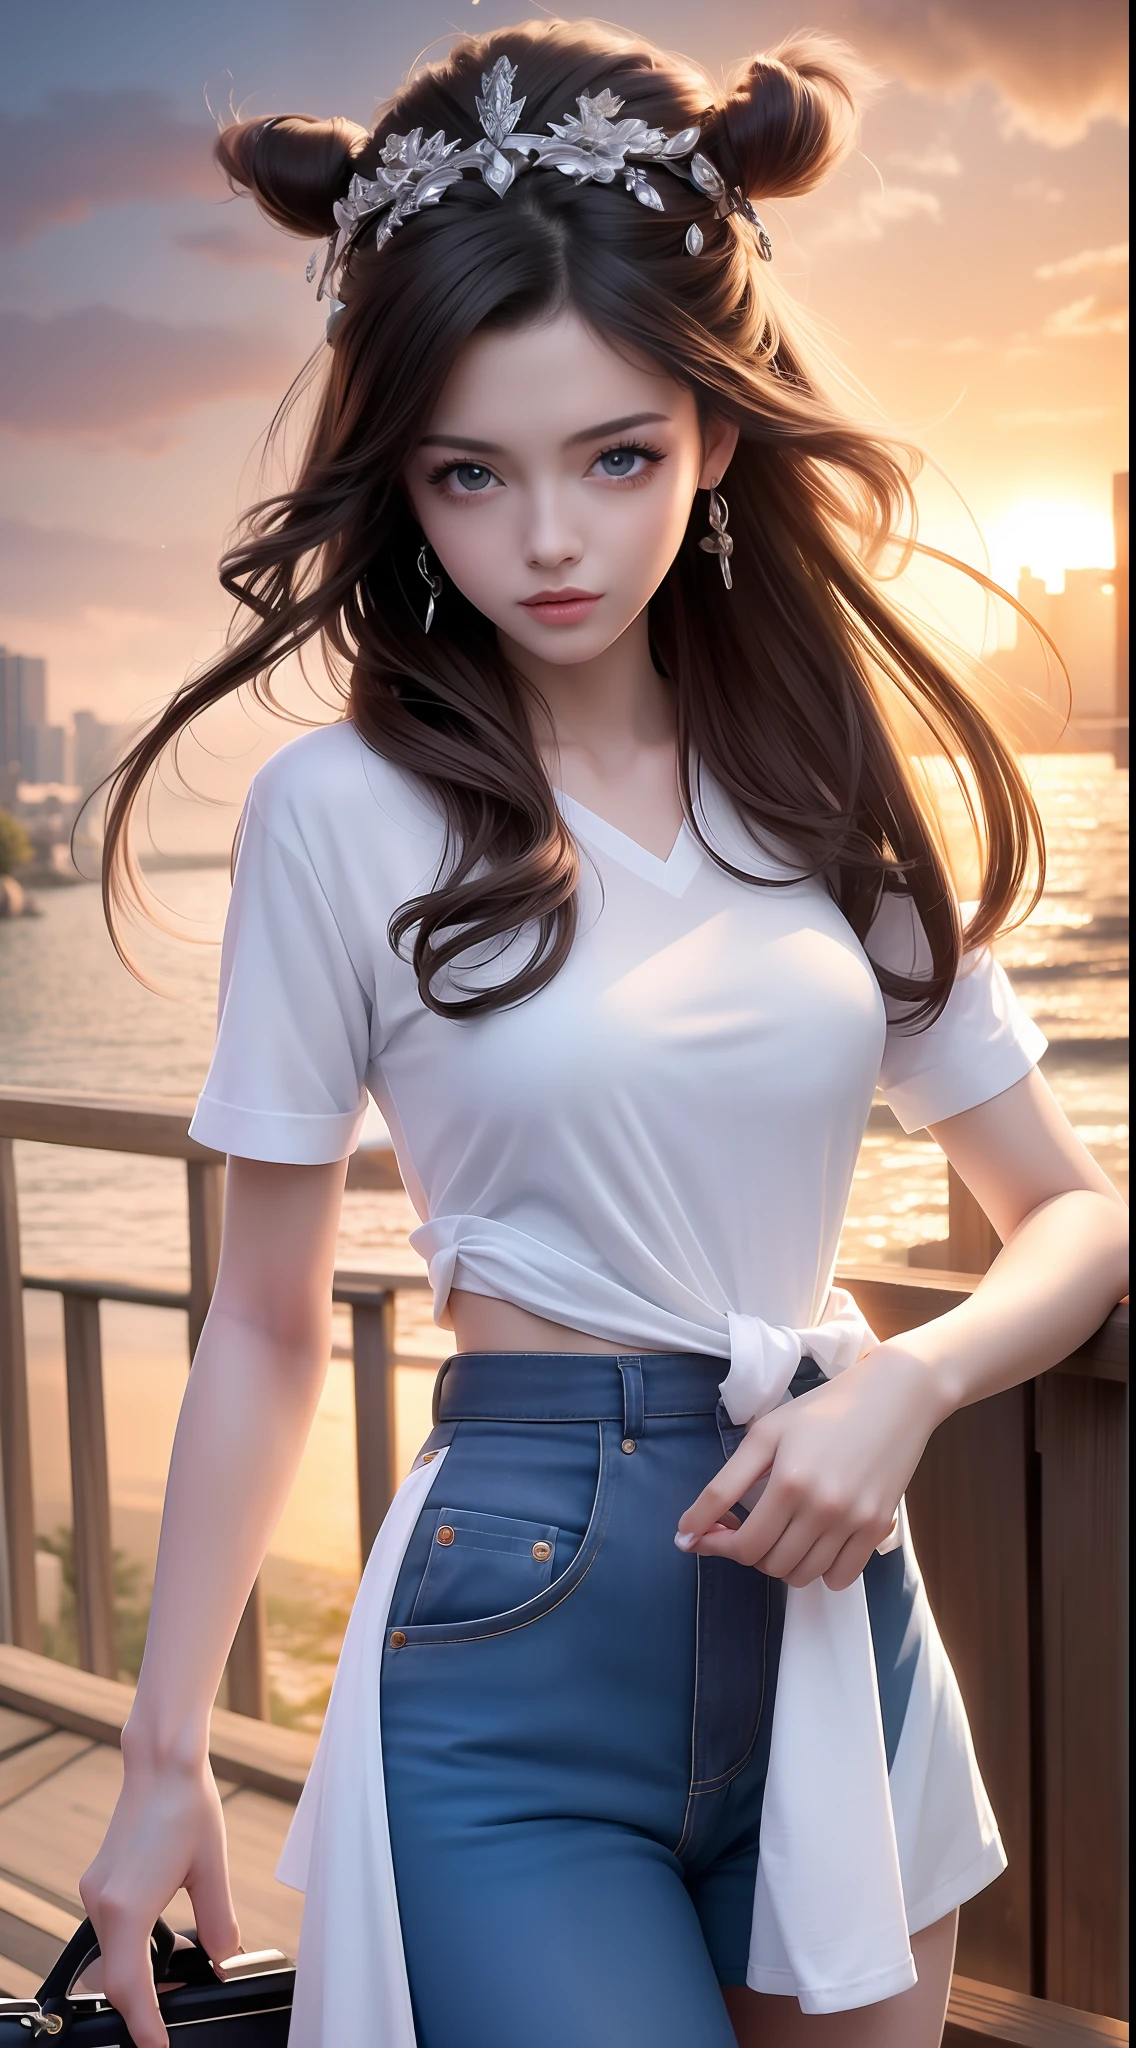 4k ultra hd, masterpiece, very high quality, a girl, age 20 years old girl, good face, smooth face, detailed eyes, beautiful hair, very long hair, hair band, cute look, modern clothes, shirt, half  jeans, good shoes, morning background, buildings, sun lights, clear weather, stylish looking,